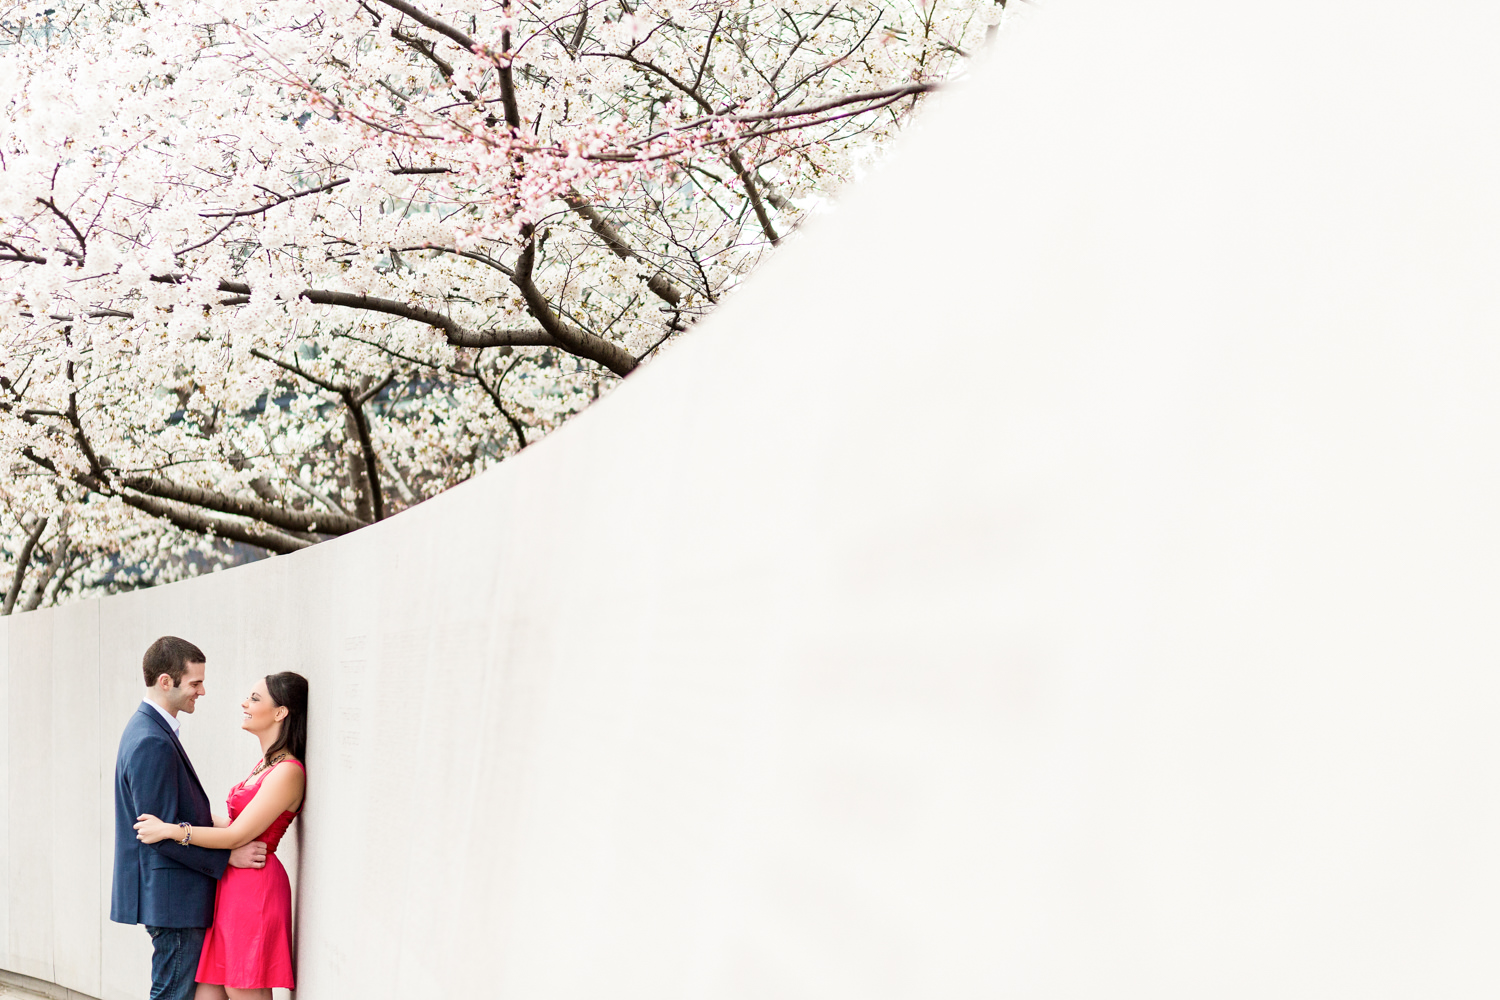 The cherry blossom festival extends through all of DC it's not just on the tidal basin, this engagement session is in Washington DC at a memorial near lower senate park, the couple is leaning up against a white wall and the white wall comes toward the camera in the frame, the gal is wearing a hot pink dress and they are laughing, Procopio Photography, best top Washington DC photographer, best top Maryland photographer, best top Virginia photographer, best top DMV photographer, best top wedding photographer, best top commercial photographer, best top portrait photographer, best top boudoir photographer, modern fine art portraits, dramatic, unique, different, bold, editorial, photojournalism, award winning photographer, published photographer, memorable images, be different, stand out, engagement photography